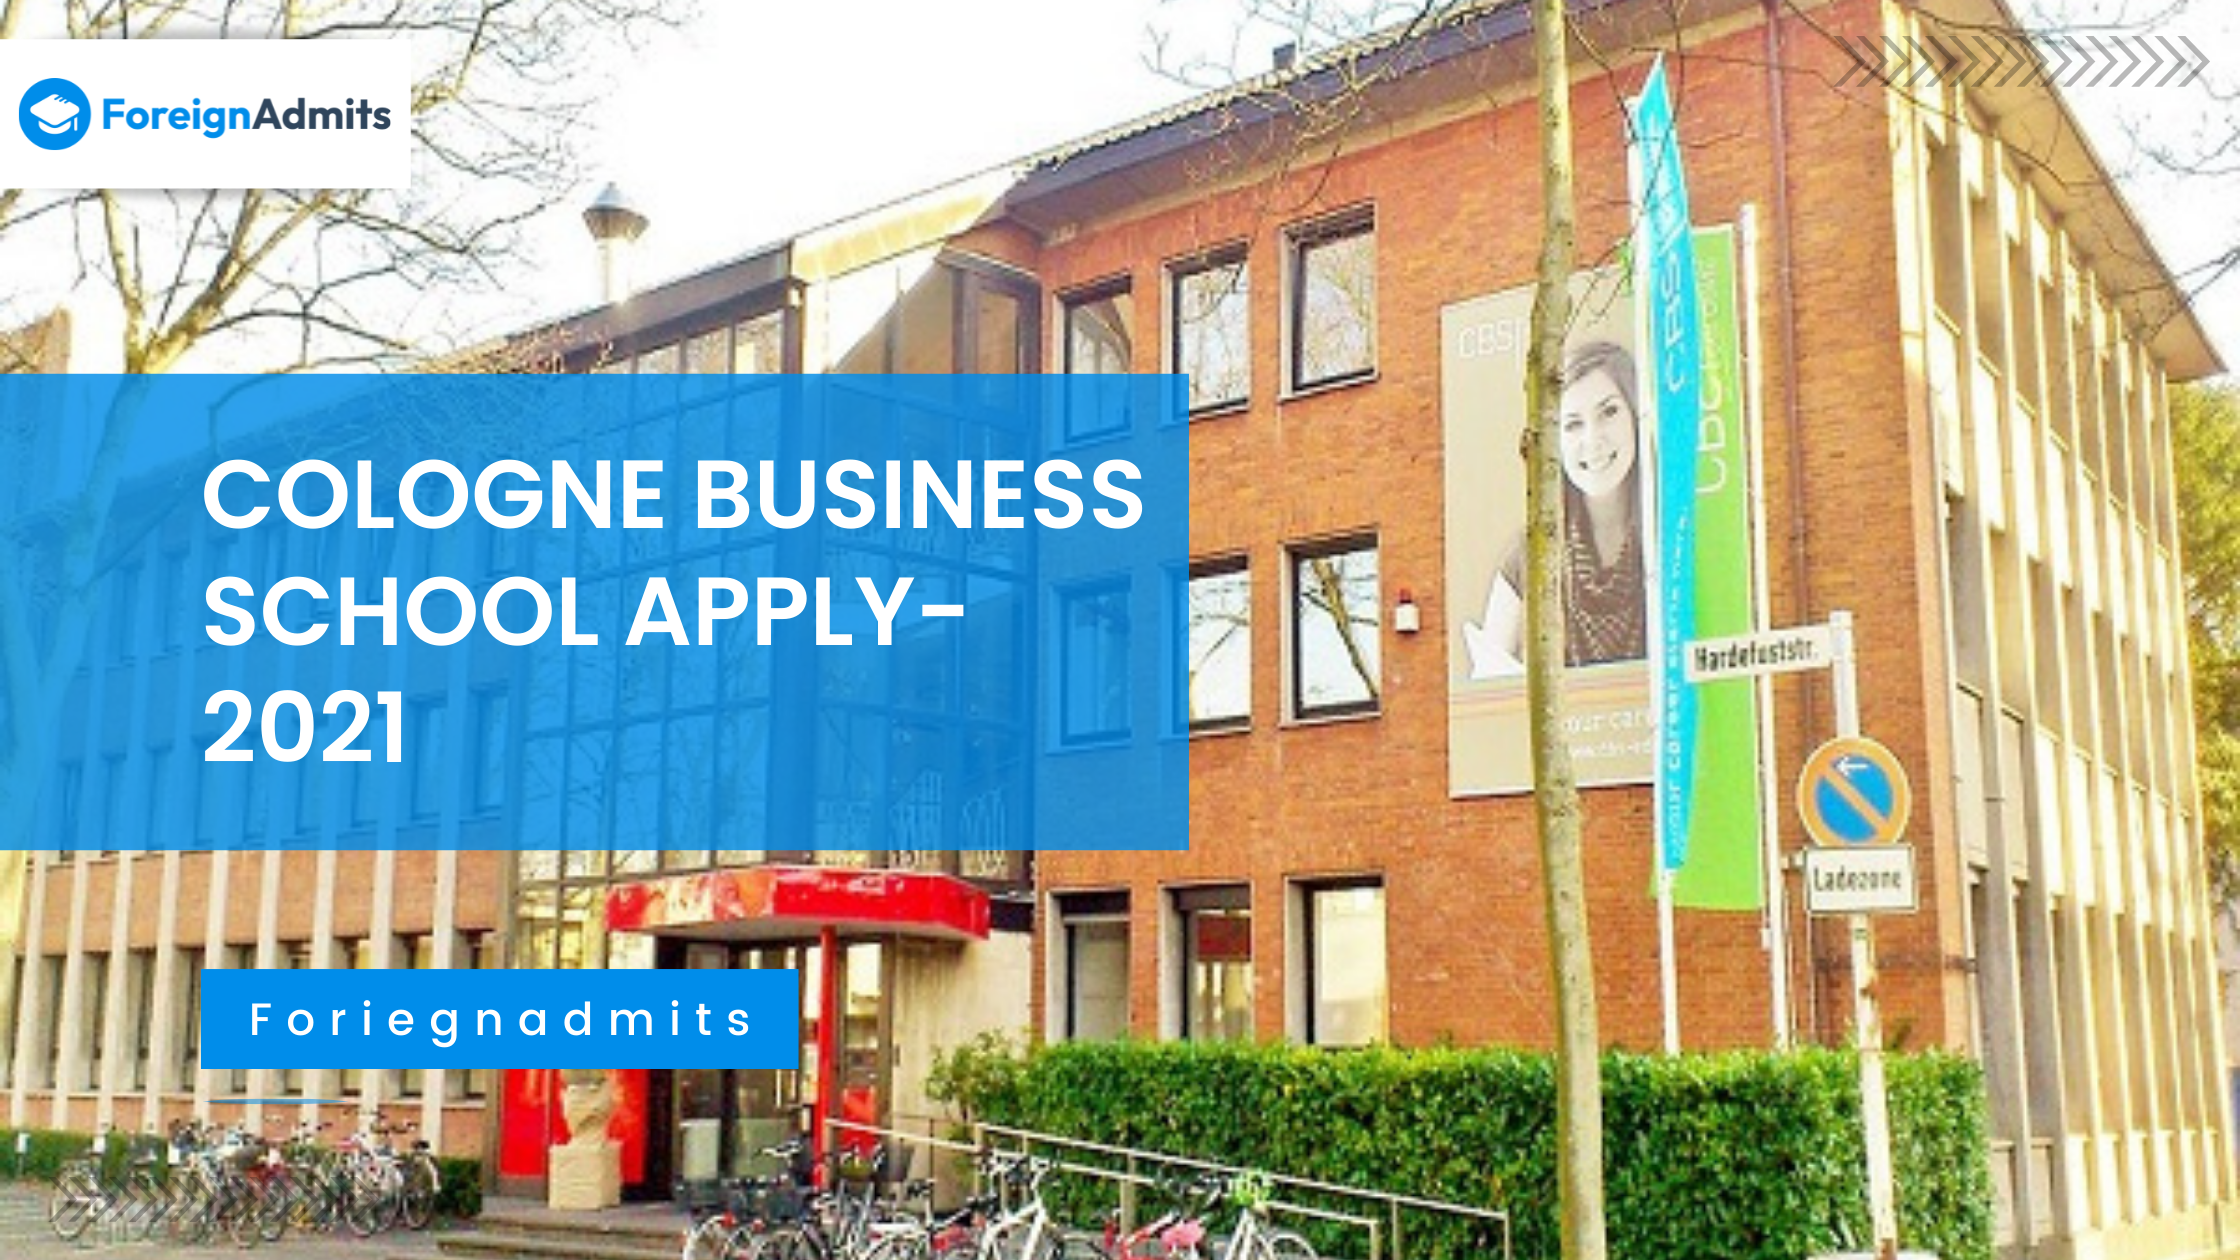 Cologne Business School Apply- 2021